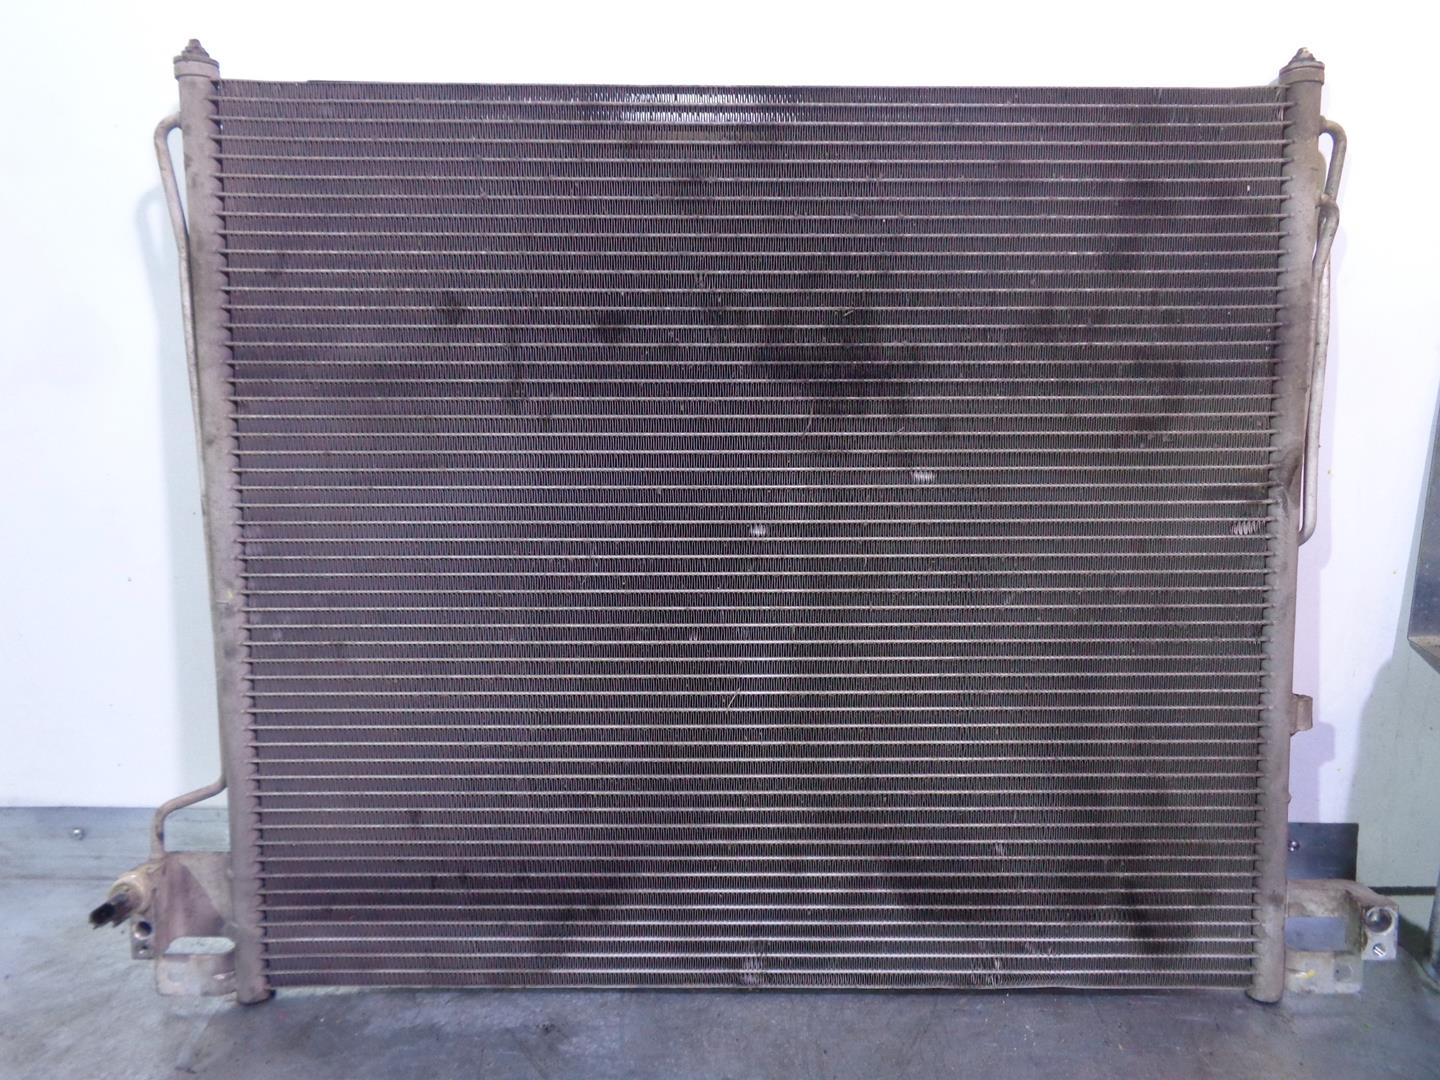 NISSAN NP300 1 generation (2008-2015) Air Con Radiator 82100EB00A, EE50365400, 92100EB01A 21104380